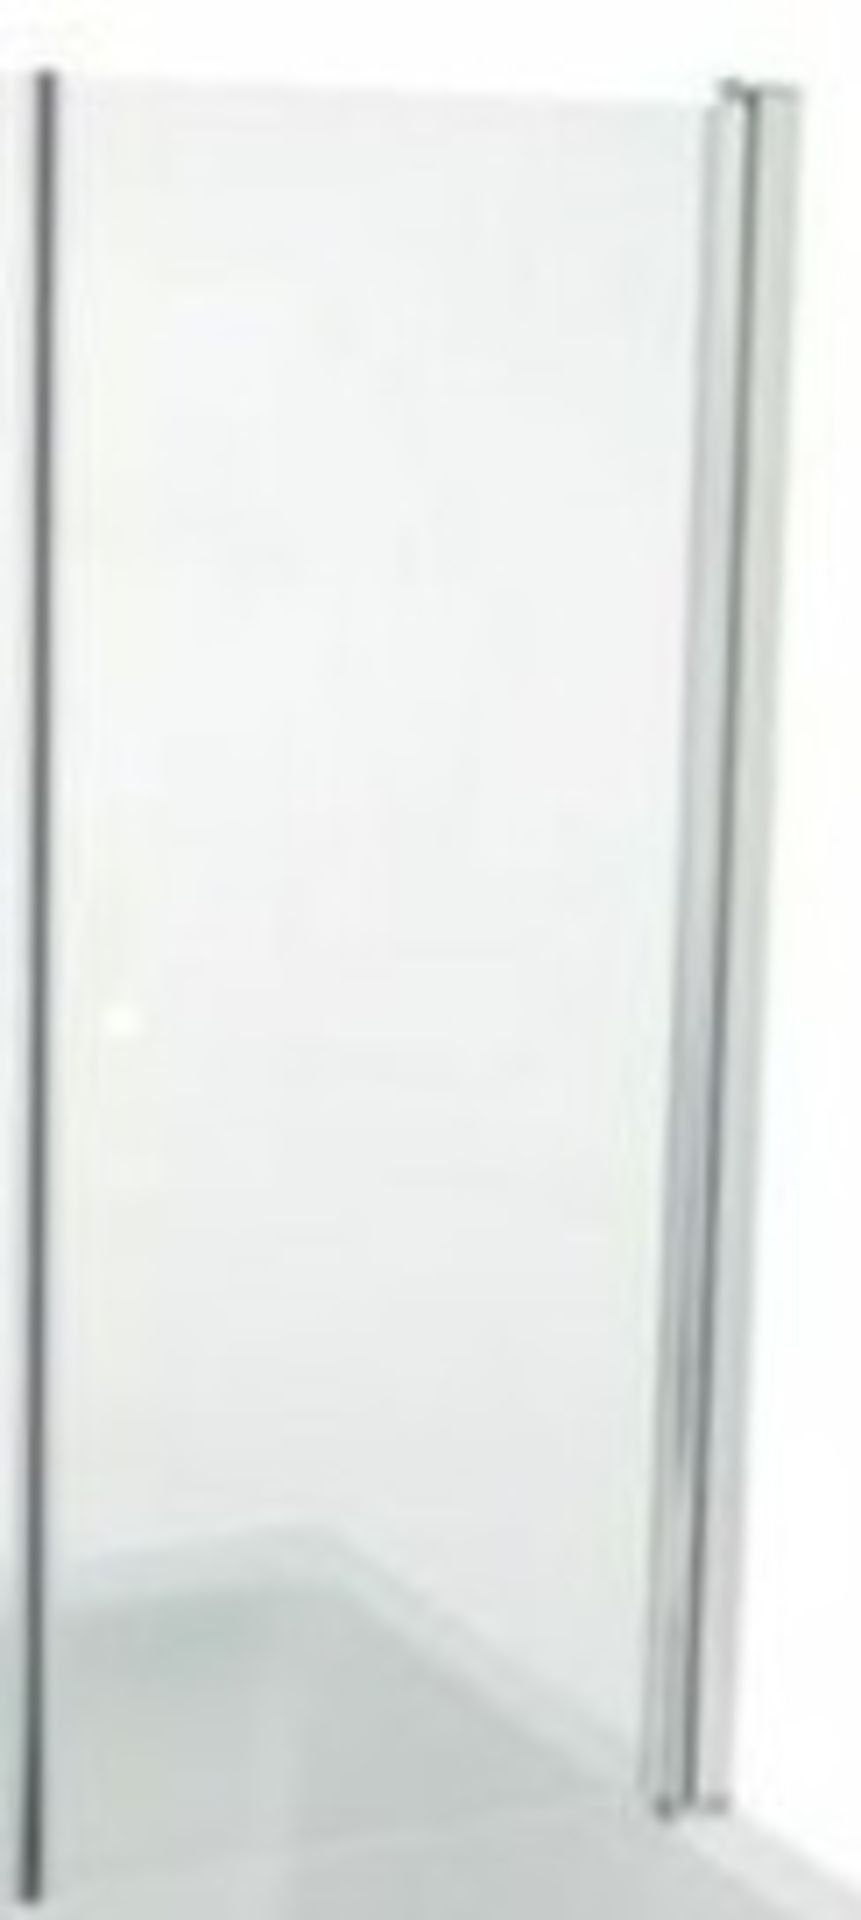 1 x Bathstore Pivoting Bath Shower Screen. Brand New And Boxed. Factory Sealed. RRP £225 - Image 2 of 2